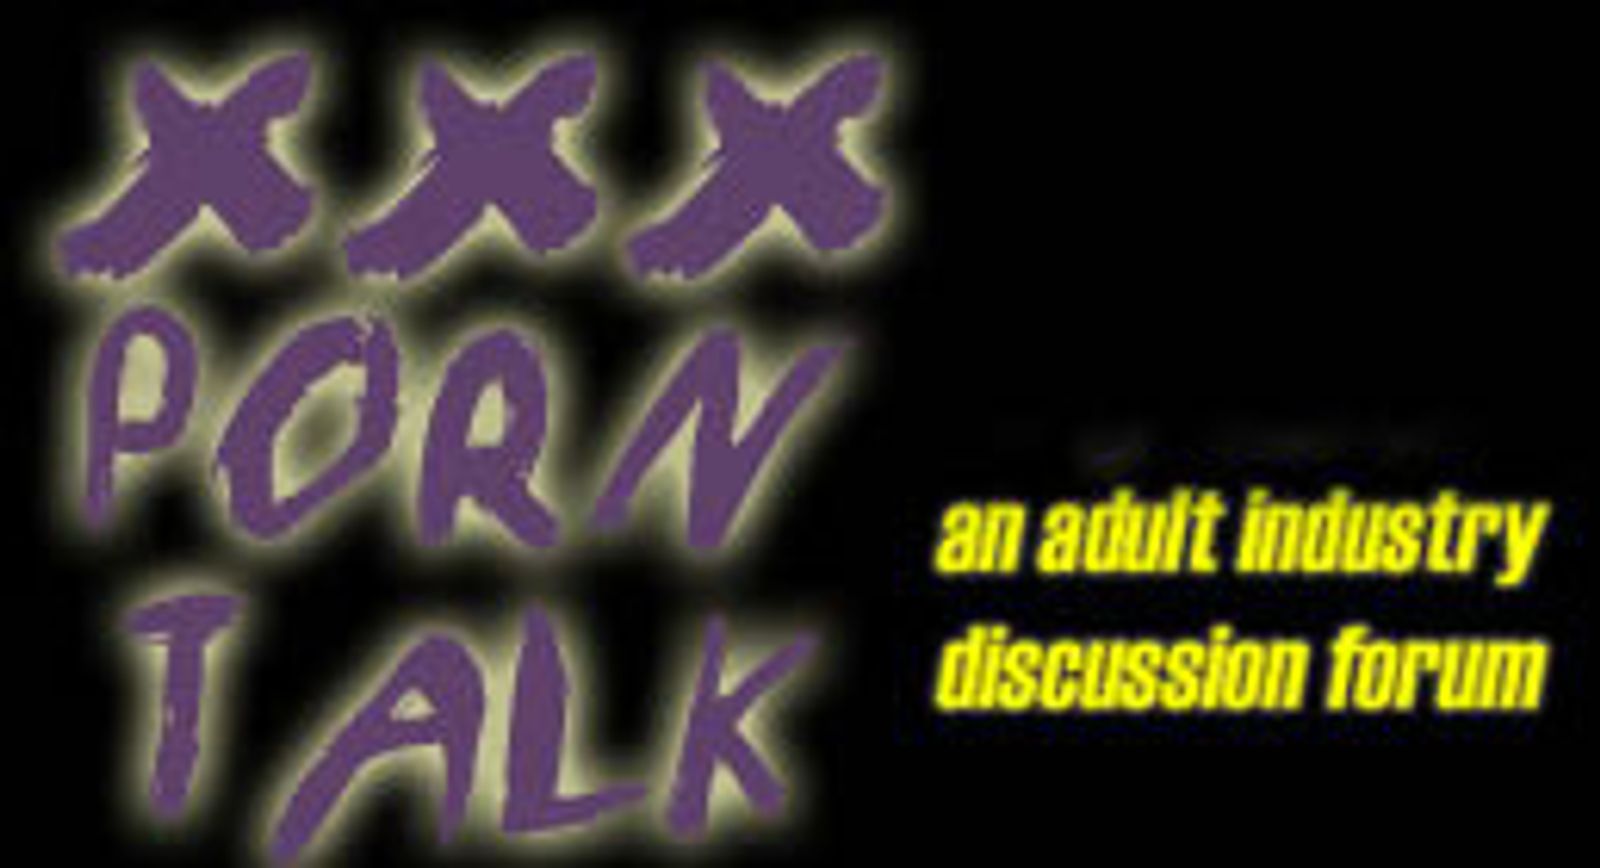 XXX Porn Talk Rolling Out Weekly E-Chats